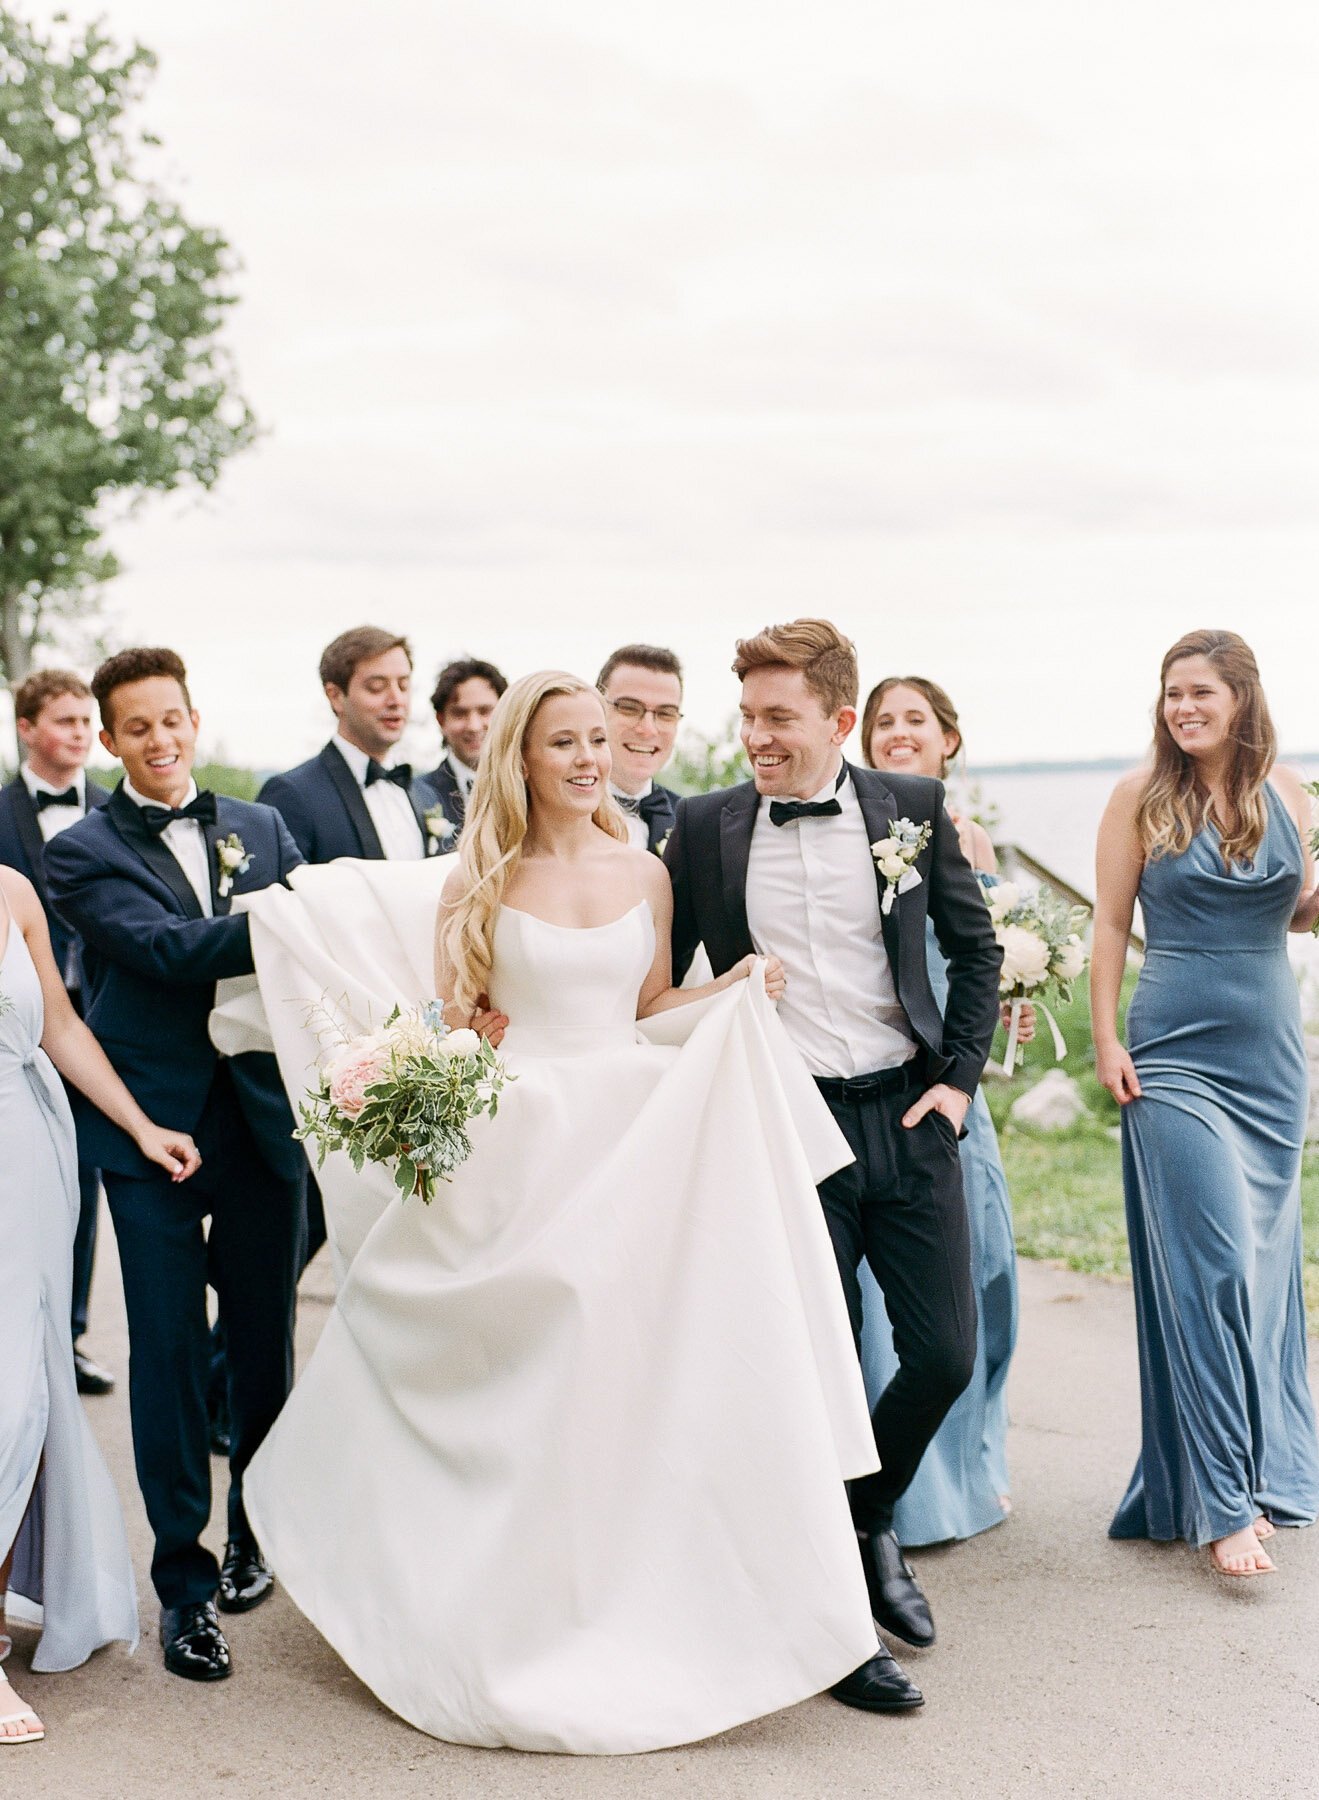 Chautauqua Institution Wedding in New York with EVL Events and Heirloom Soul Floral Design